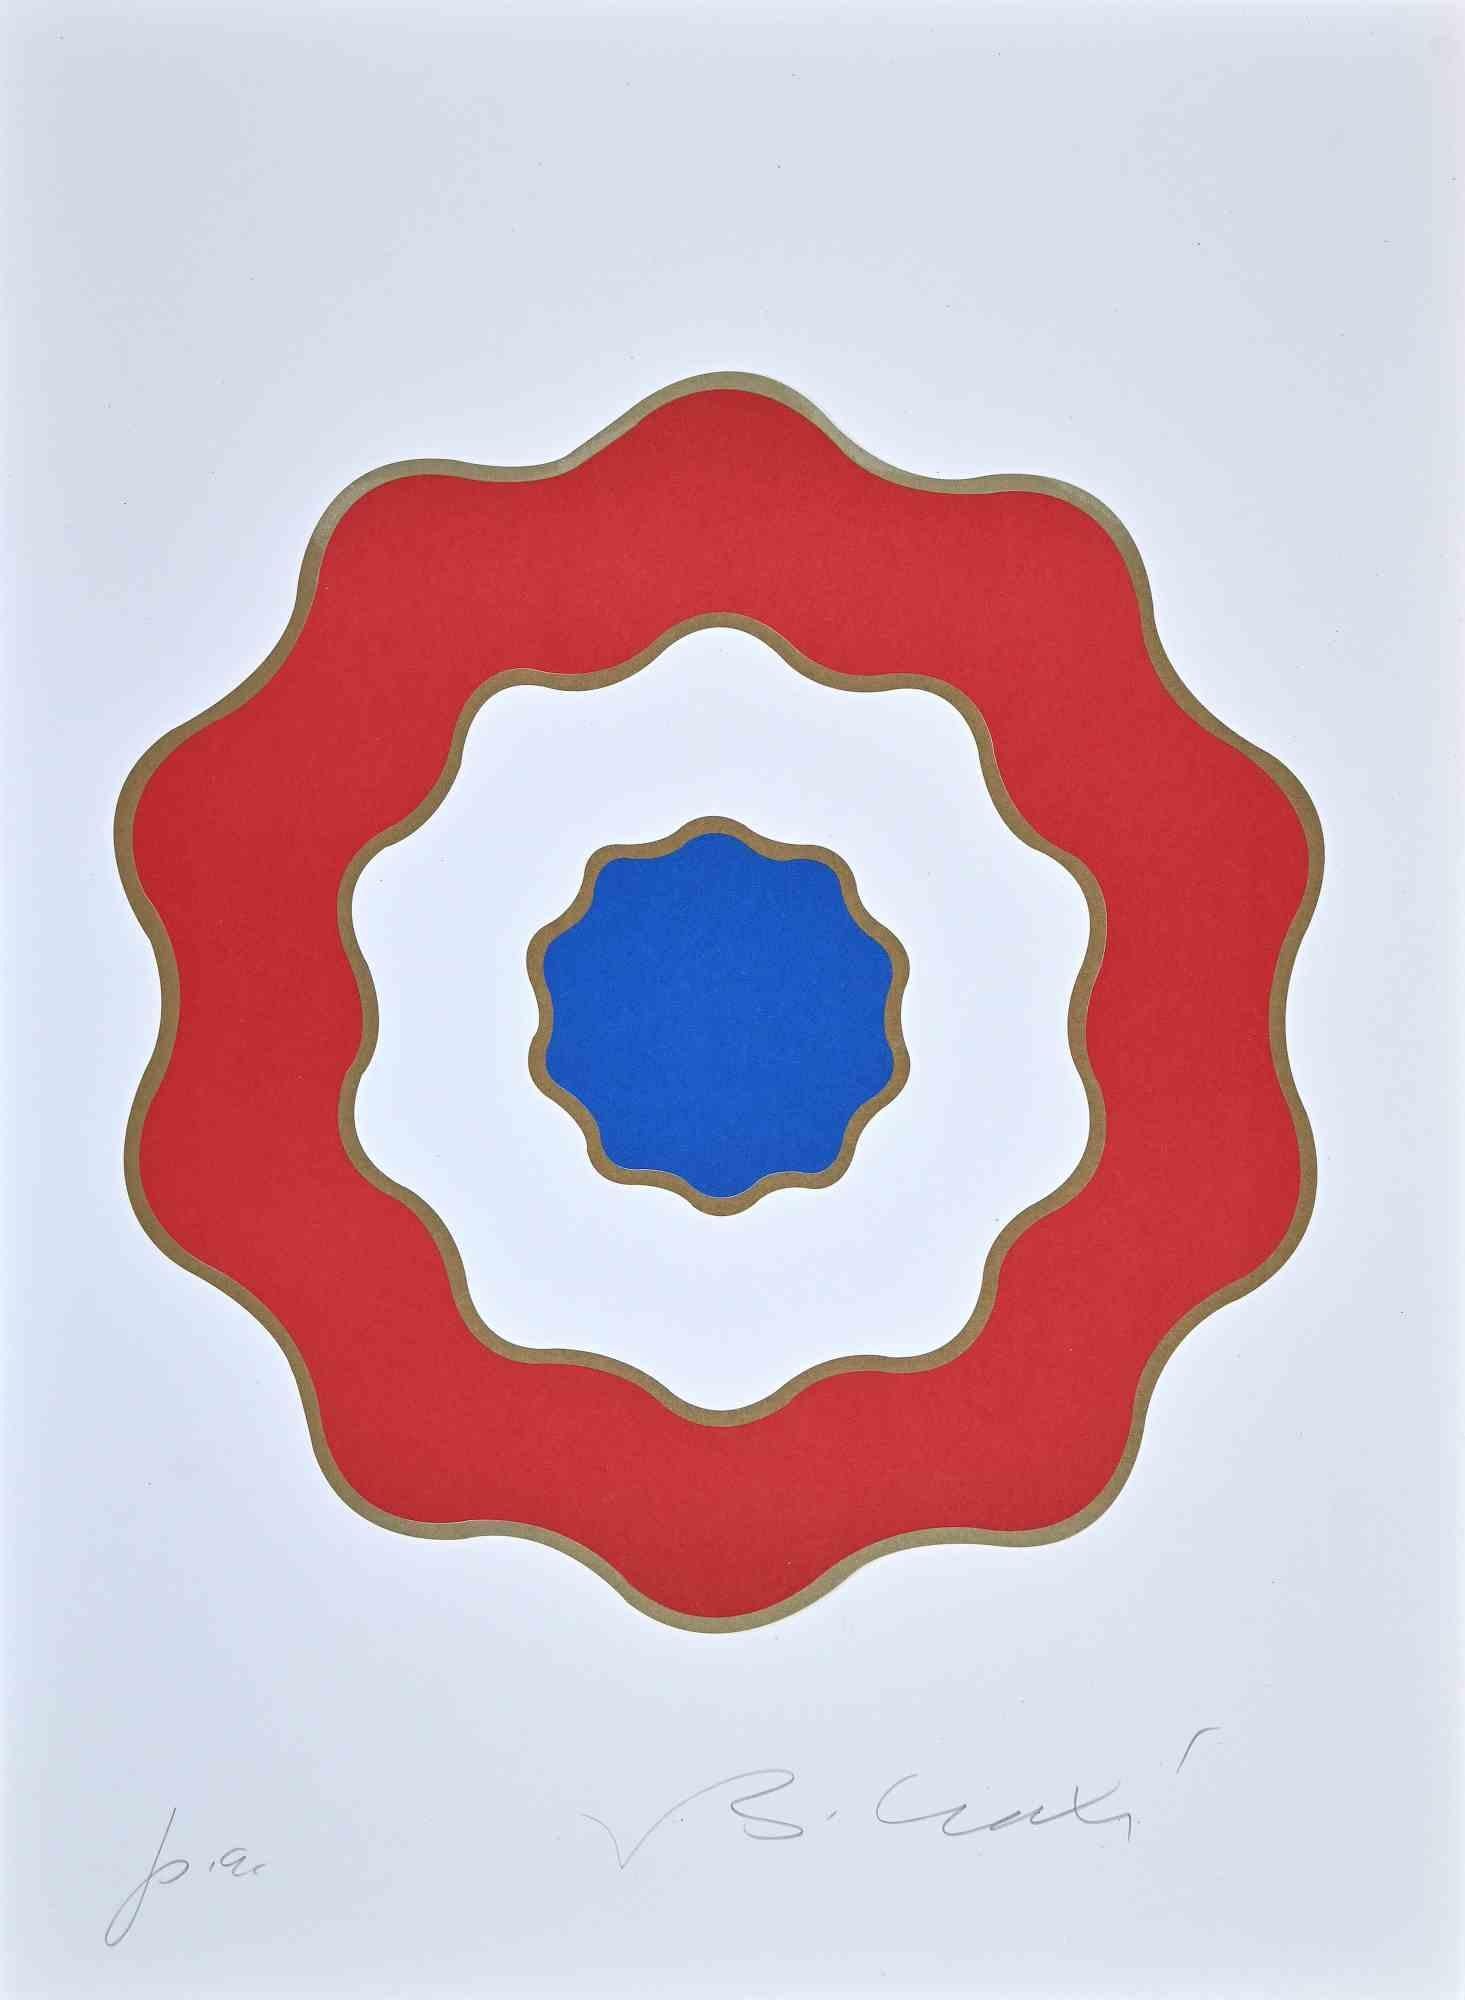 The Cockade  is an original lithograph on paper realized by the Italian politician Bettino Craxi in 1989. 

Original lithograph on paper. 

Hand-signed in pencil on the lower right corner: B.Craxi . Artist's Proof. On the lower left corner: P.A. in